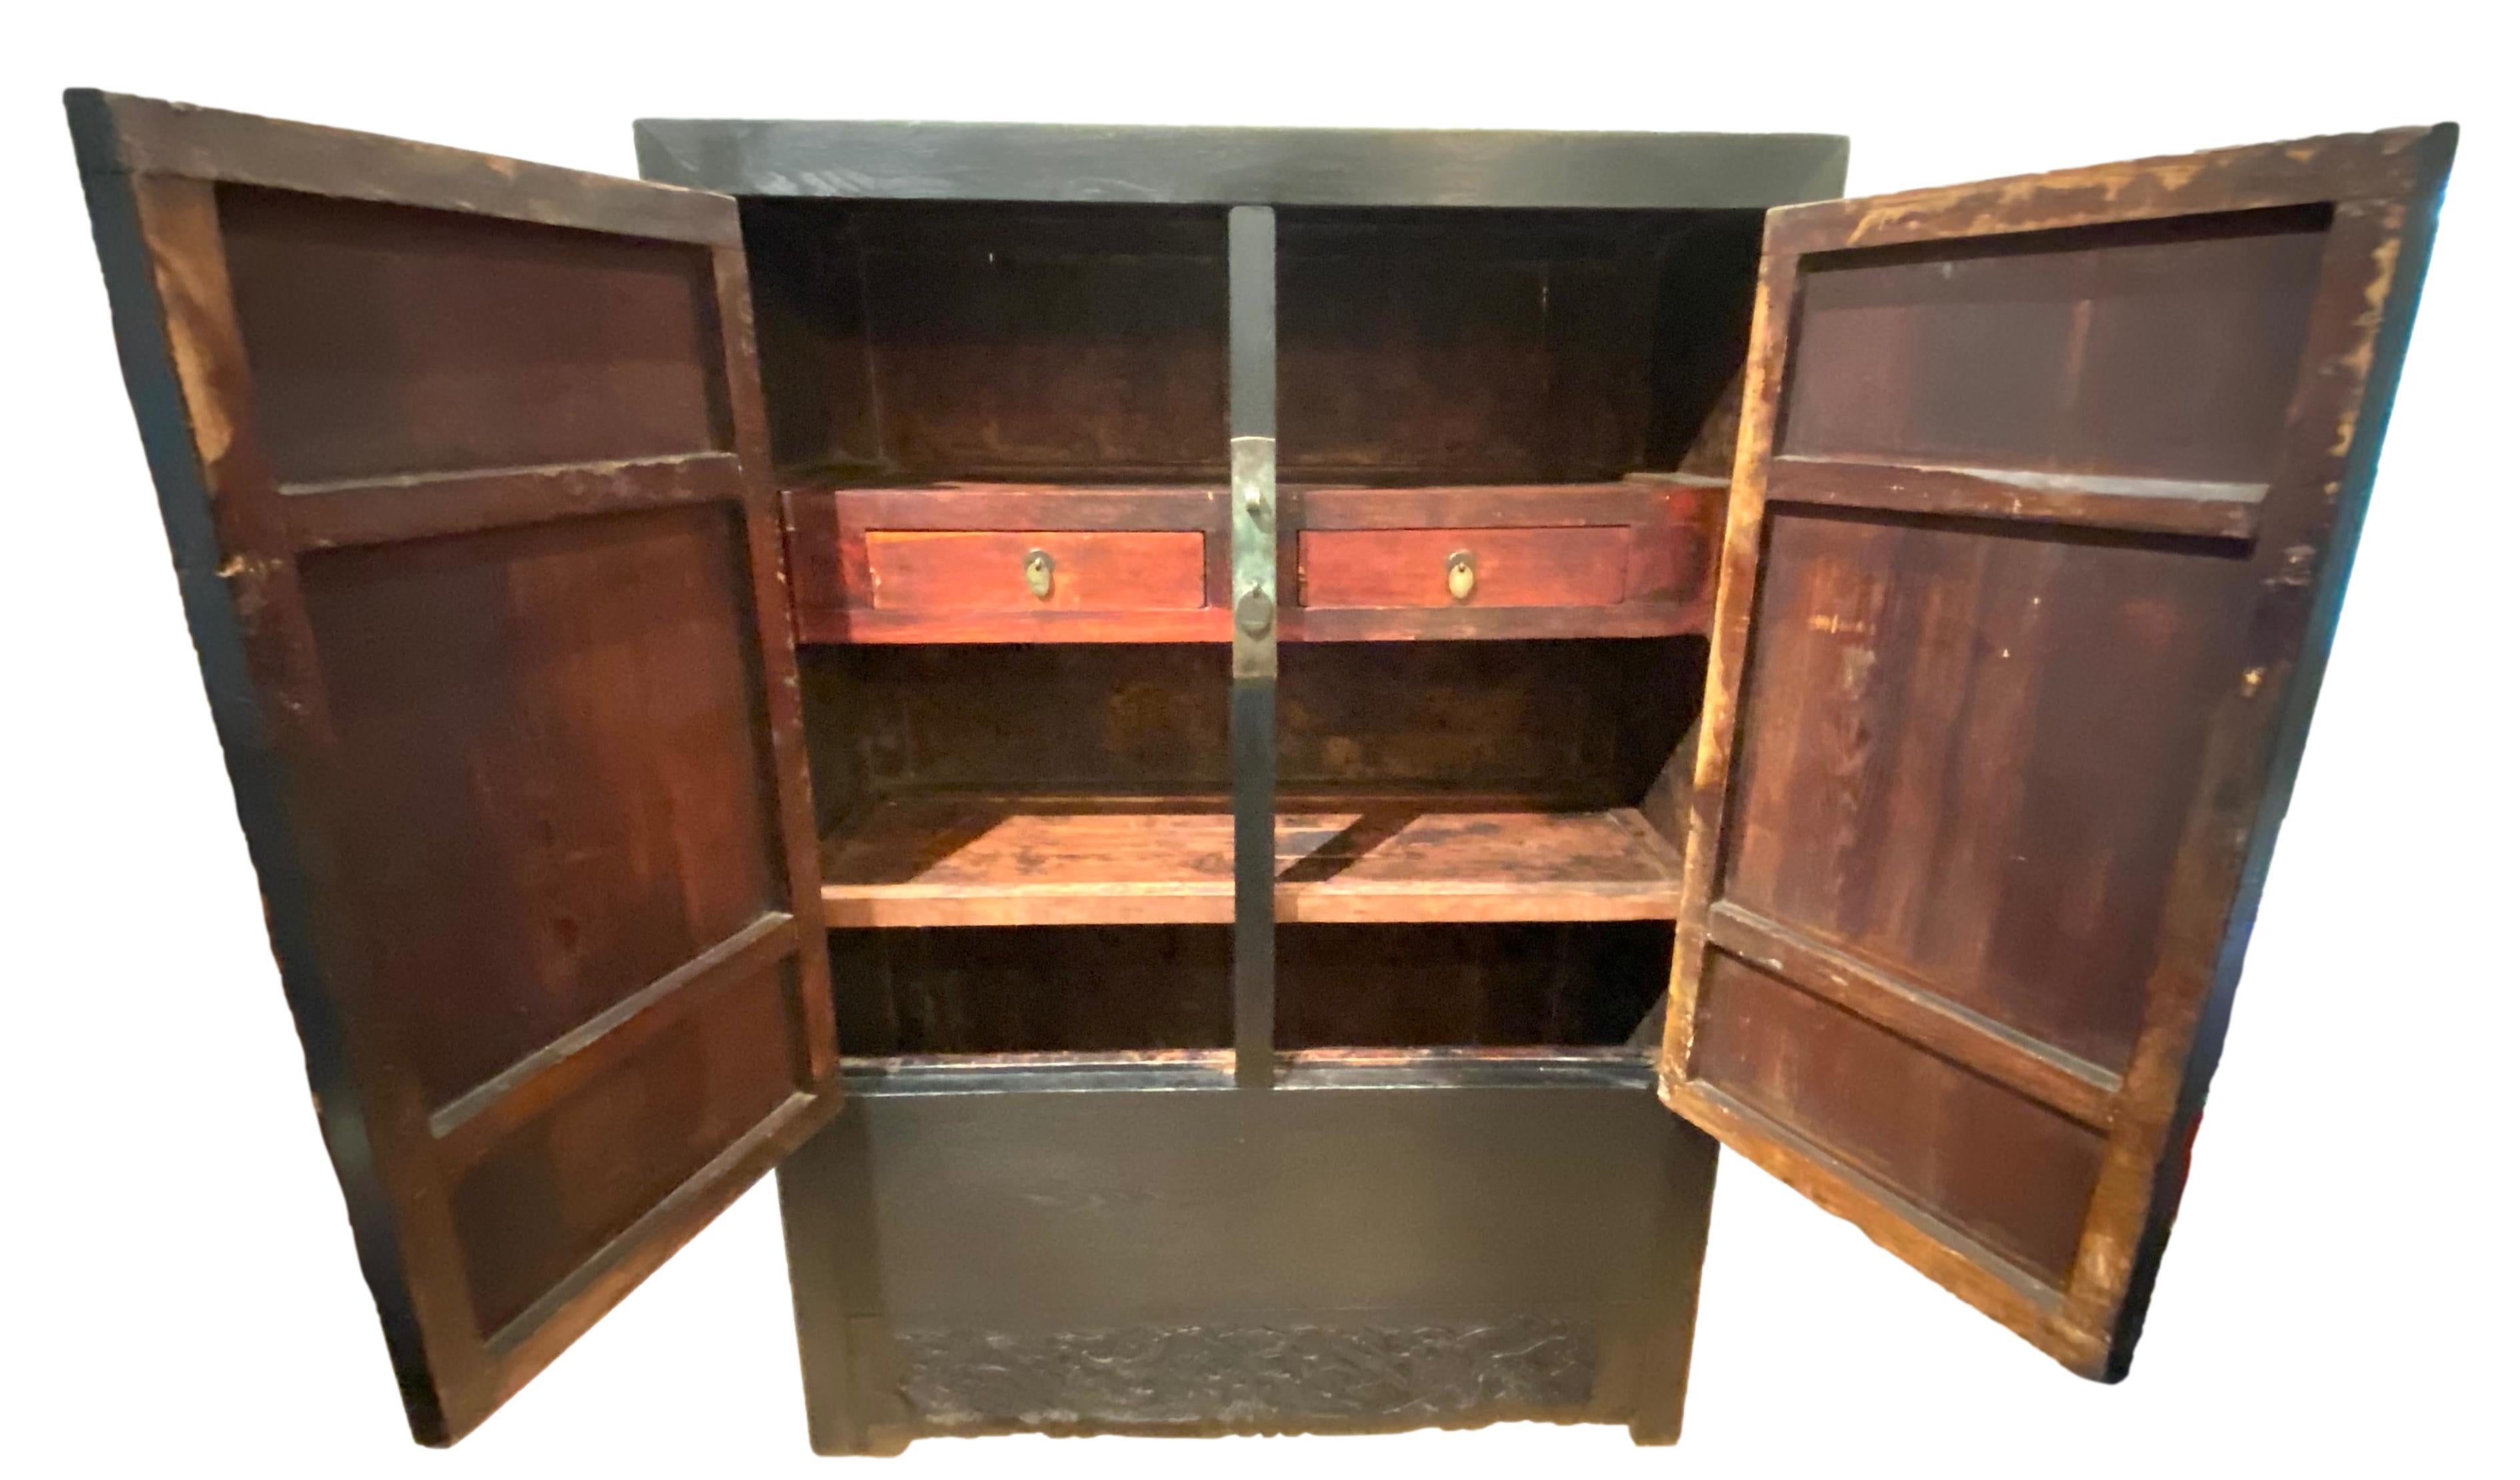 Very large black painted Chinese cabinet in two parts... locks are not original....

Two-piece item:
Main part measures 68.75